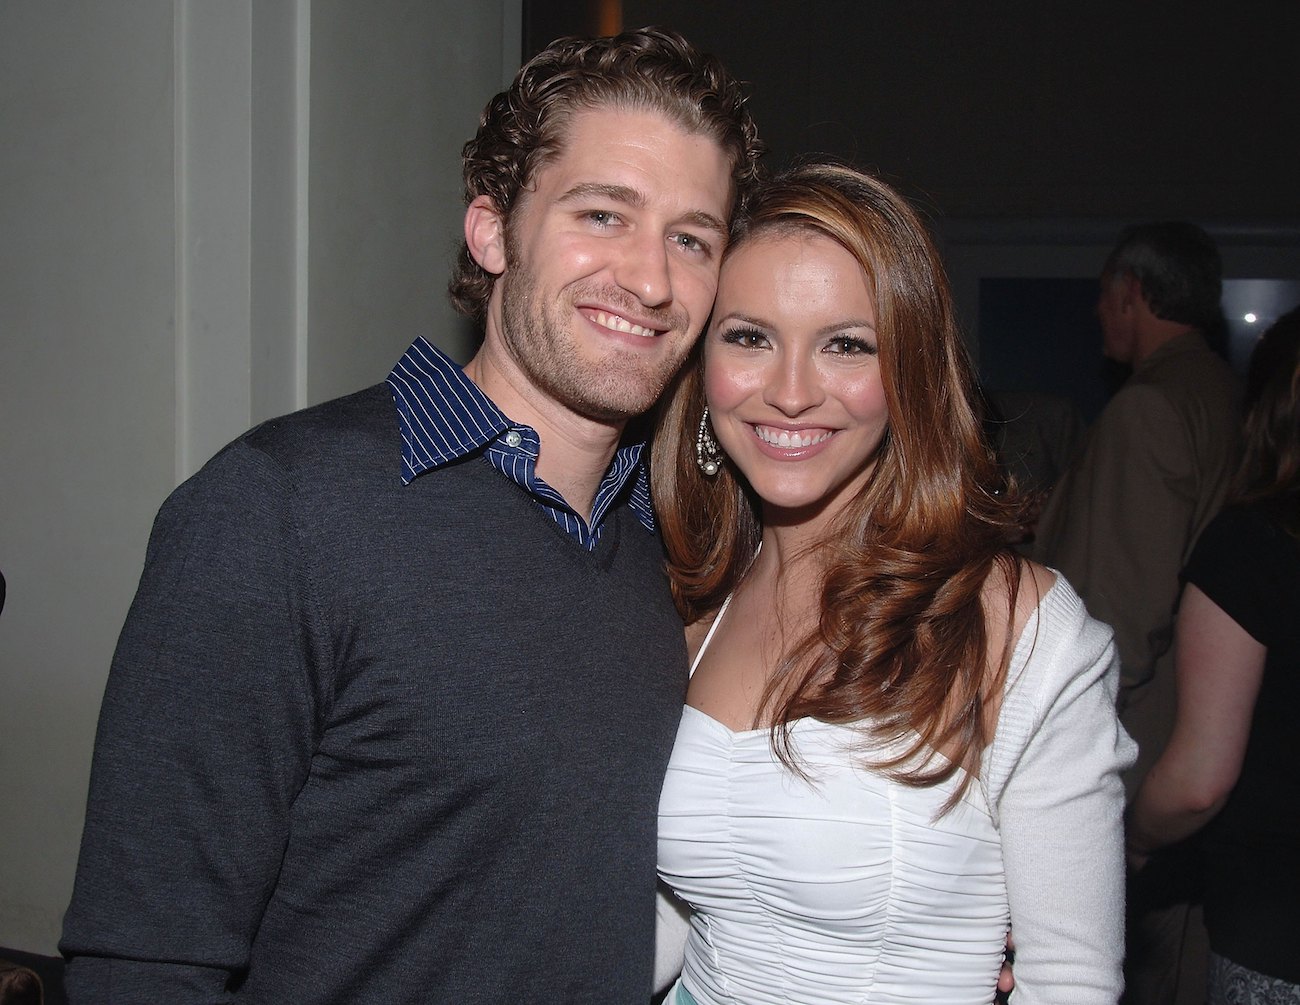 Matthew Morrison and Chrishell Stause posing together in 2006